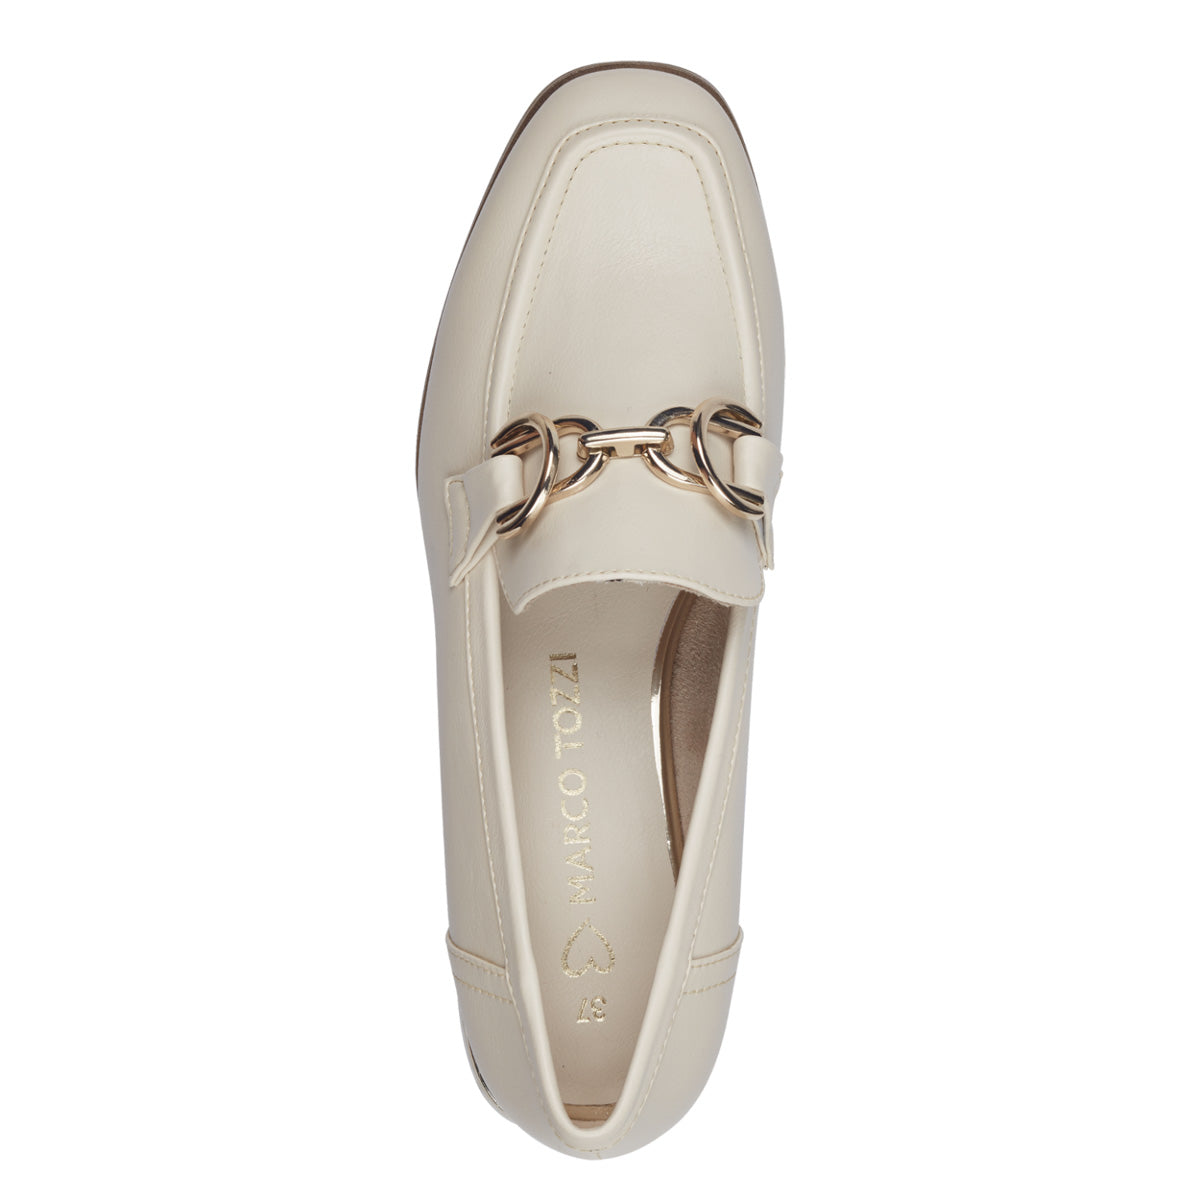 Top view of Marco Tozzi Cream Loafer, emphasizing the square toe.